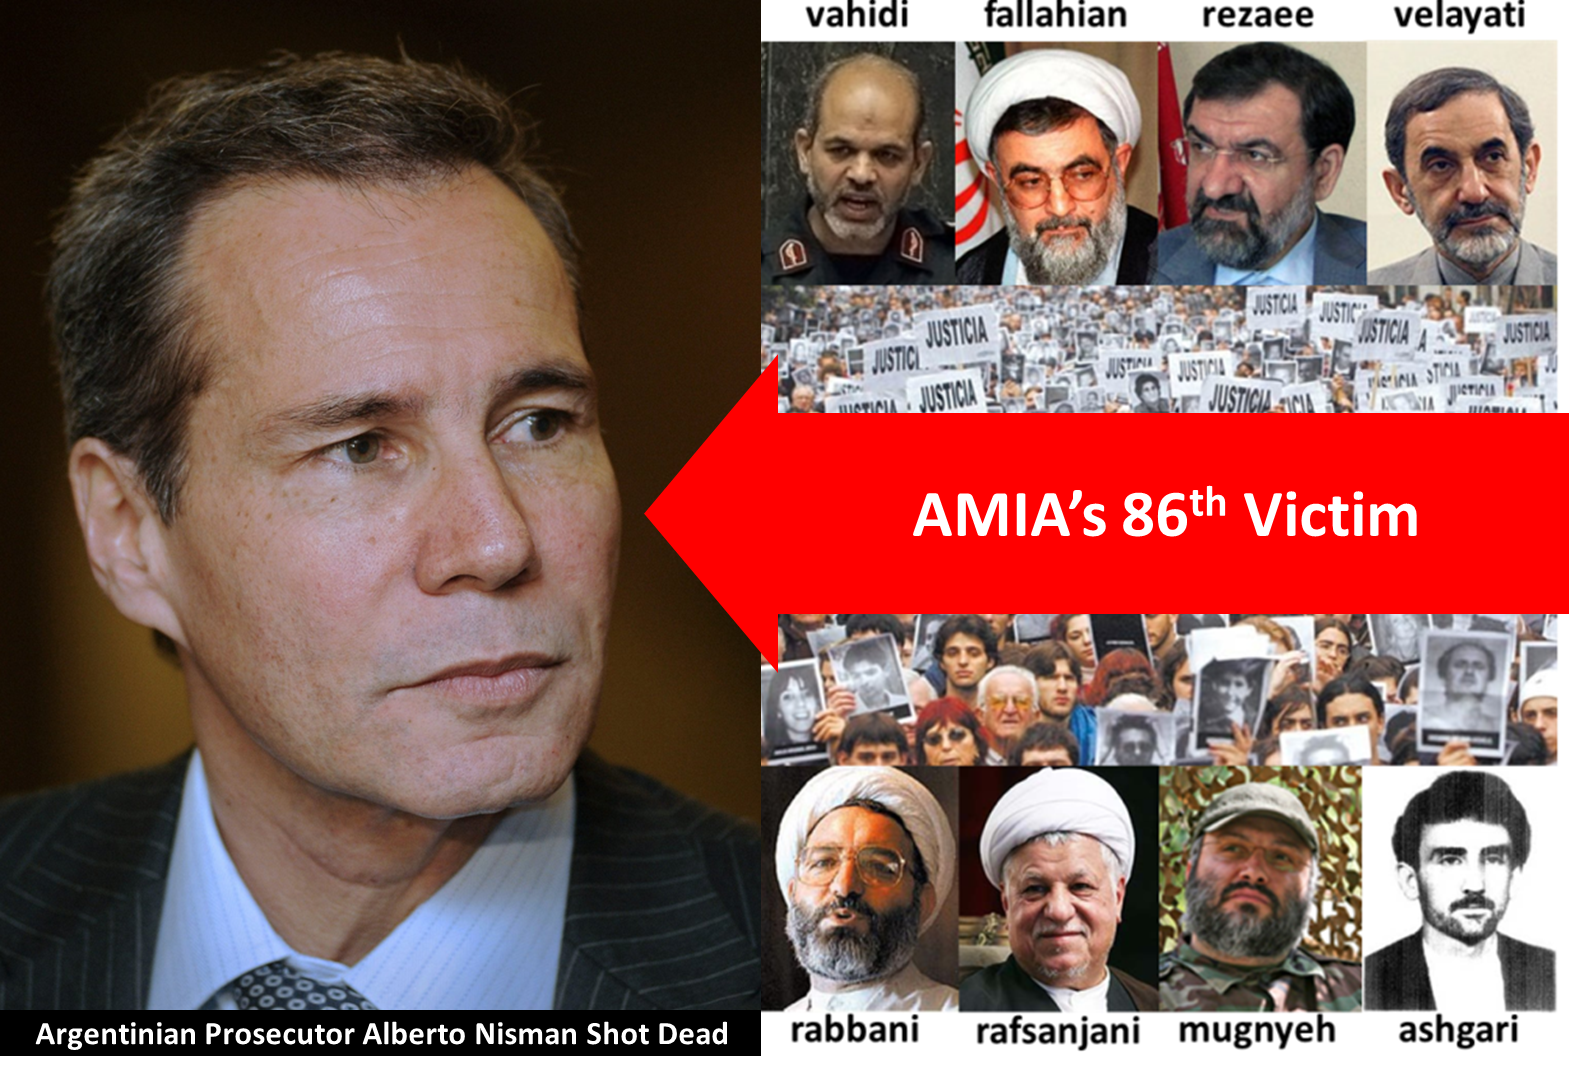 Argentinian Prosecutor Alberto Nisman Shot Dead befor he had a chance to prove to the court the unquestionable Iran's involvment in AMIA bombing.